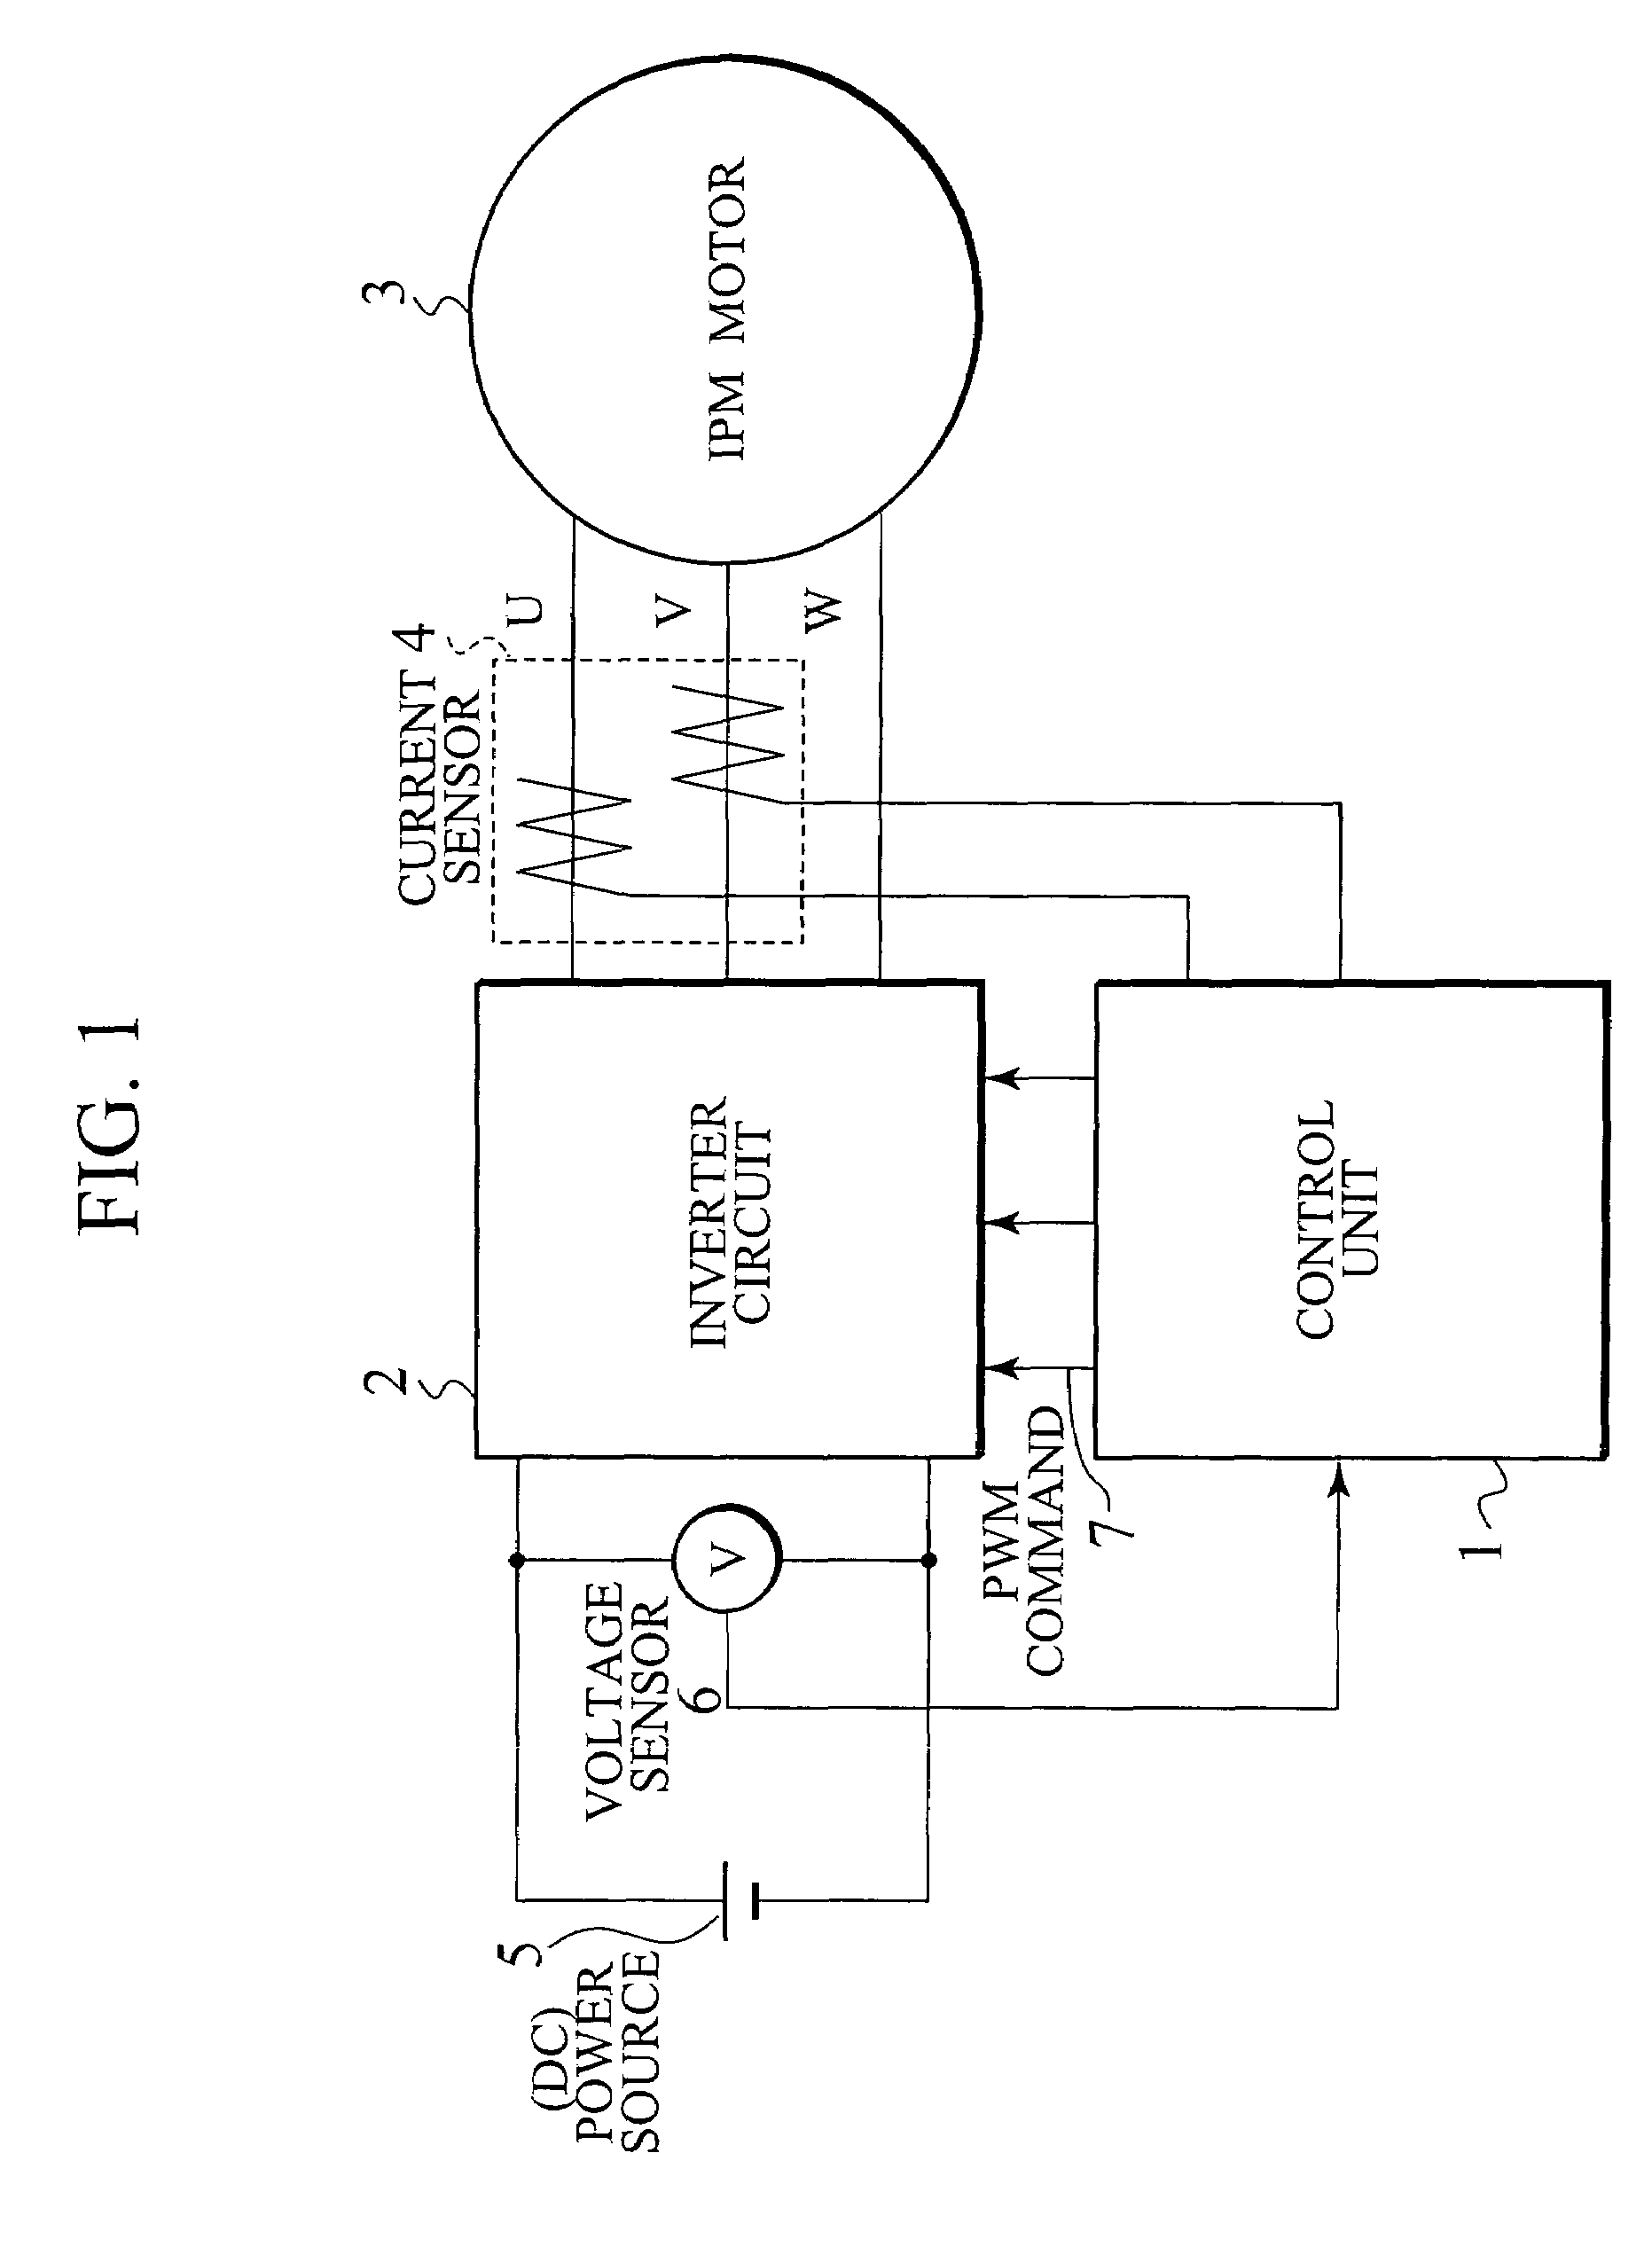 Control device for electric motor